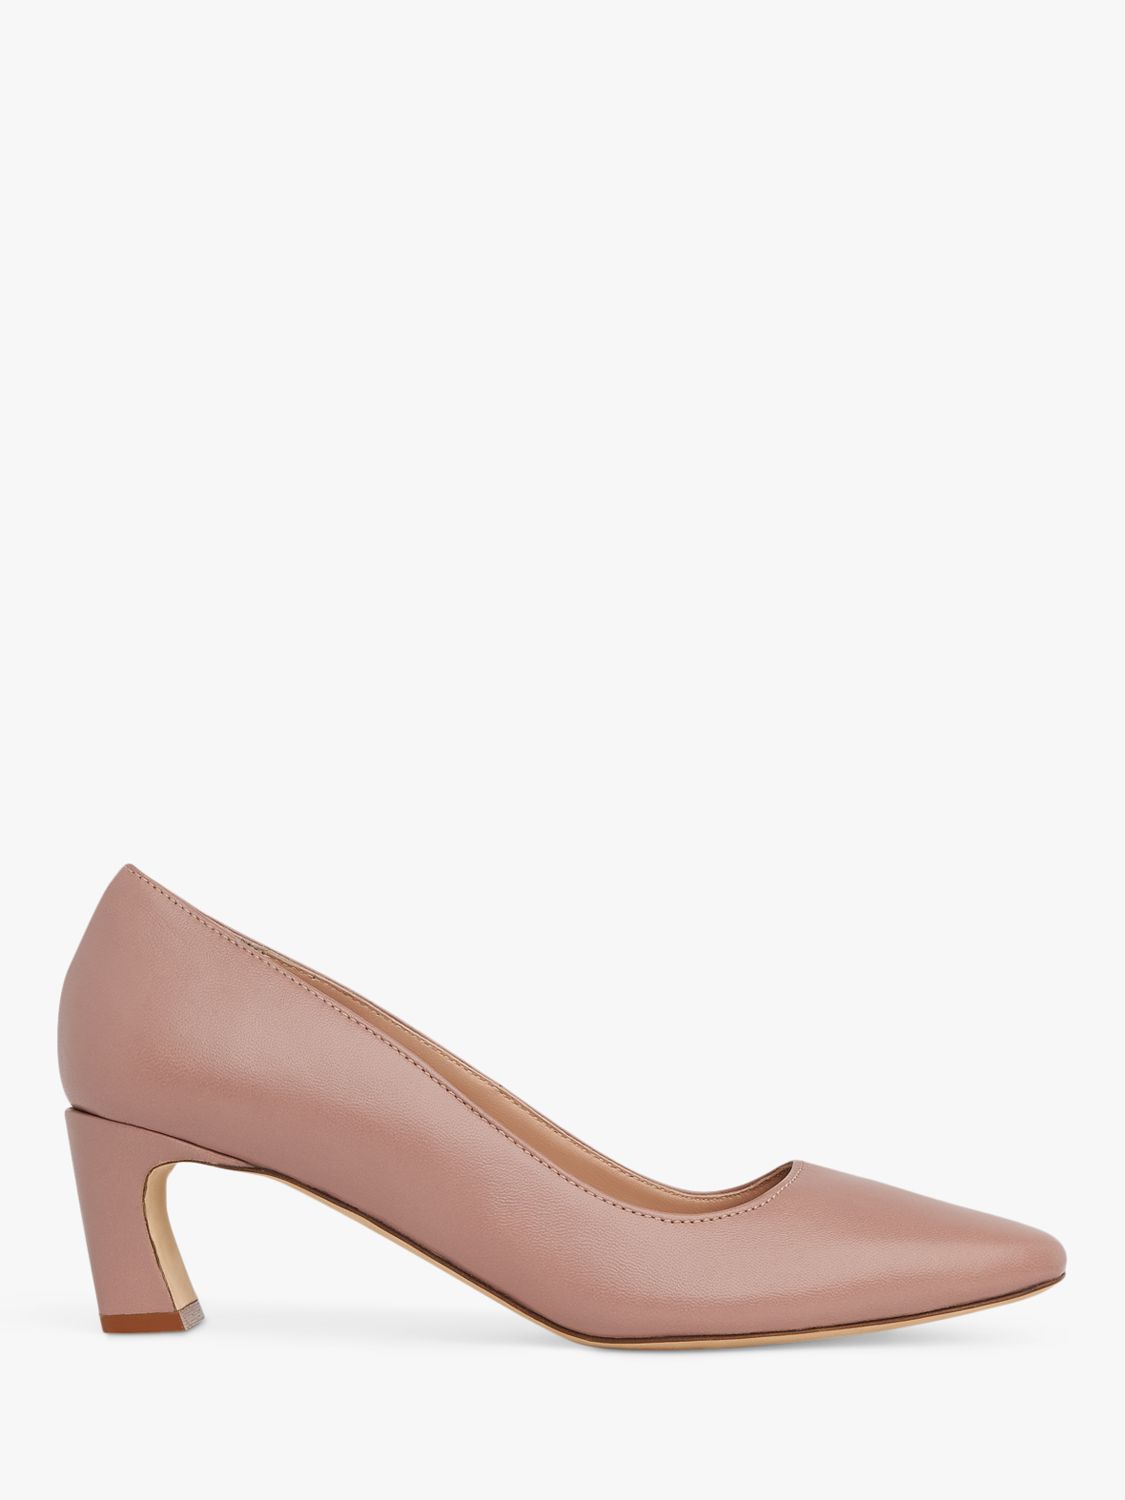 L.K.Bennett Freya Pointed Toe Leather Court Shoes, Pink Clay